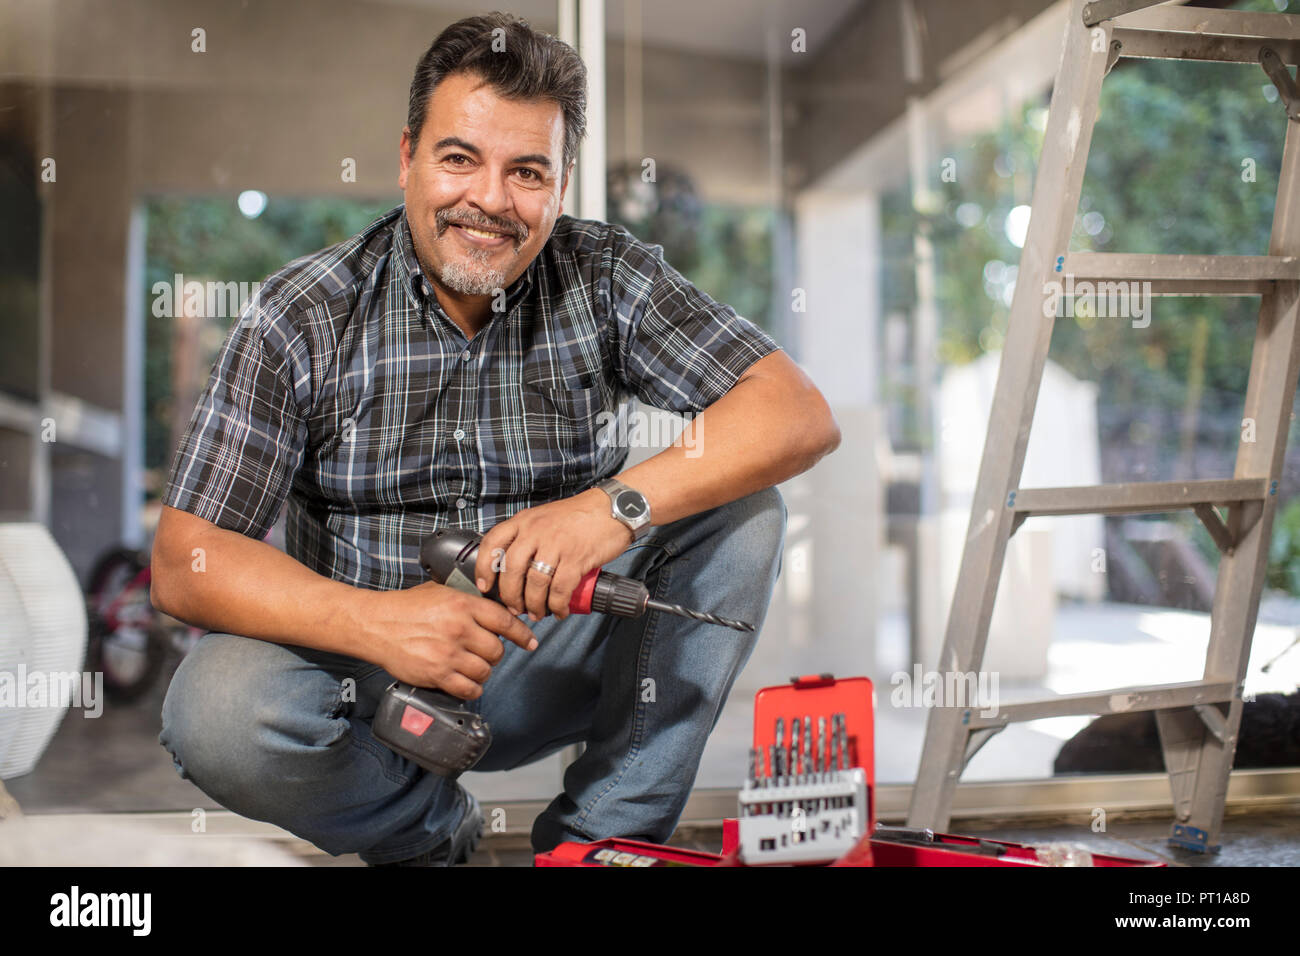 Portrait of smiling man with portable drill Stock Photo